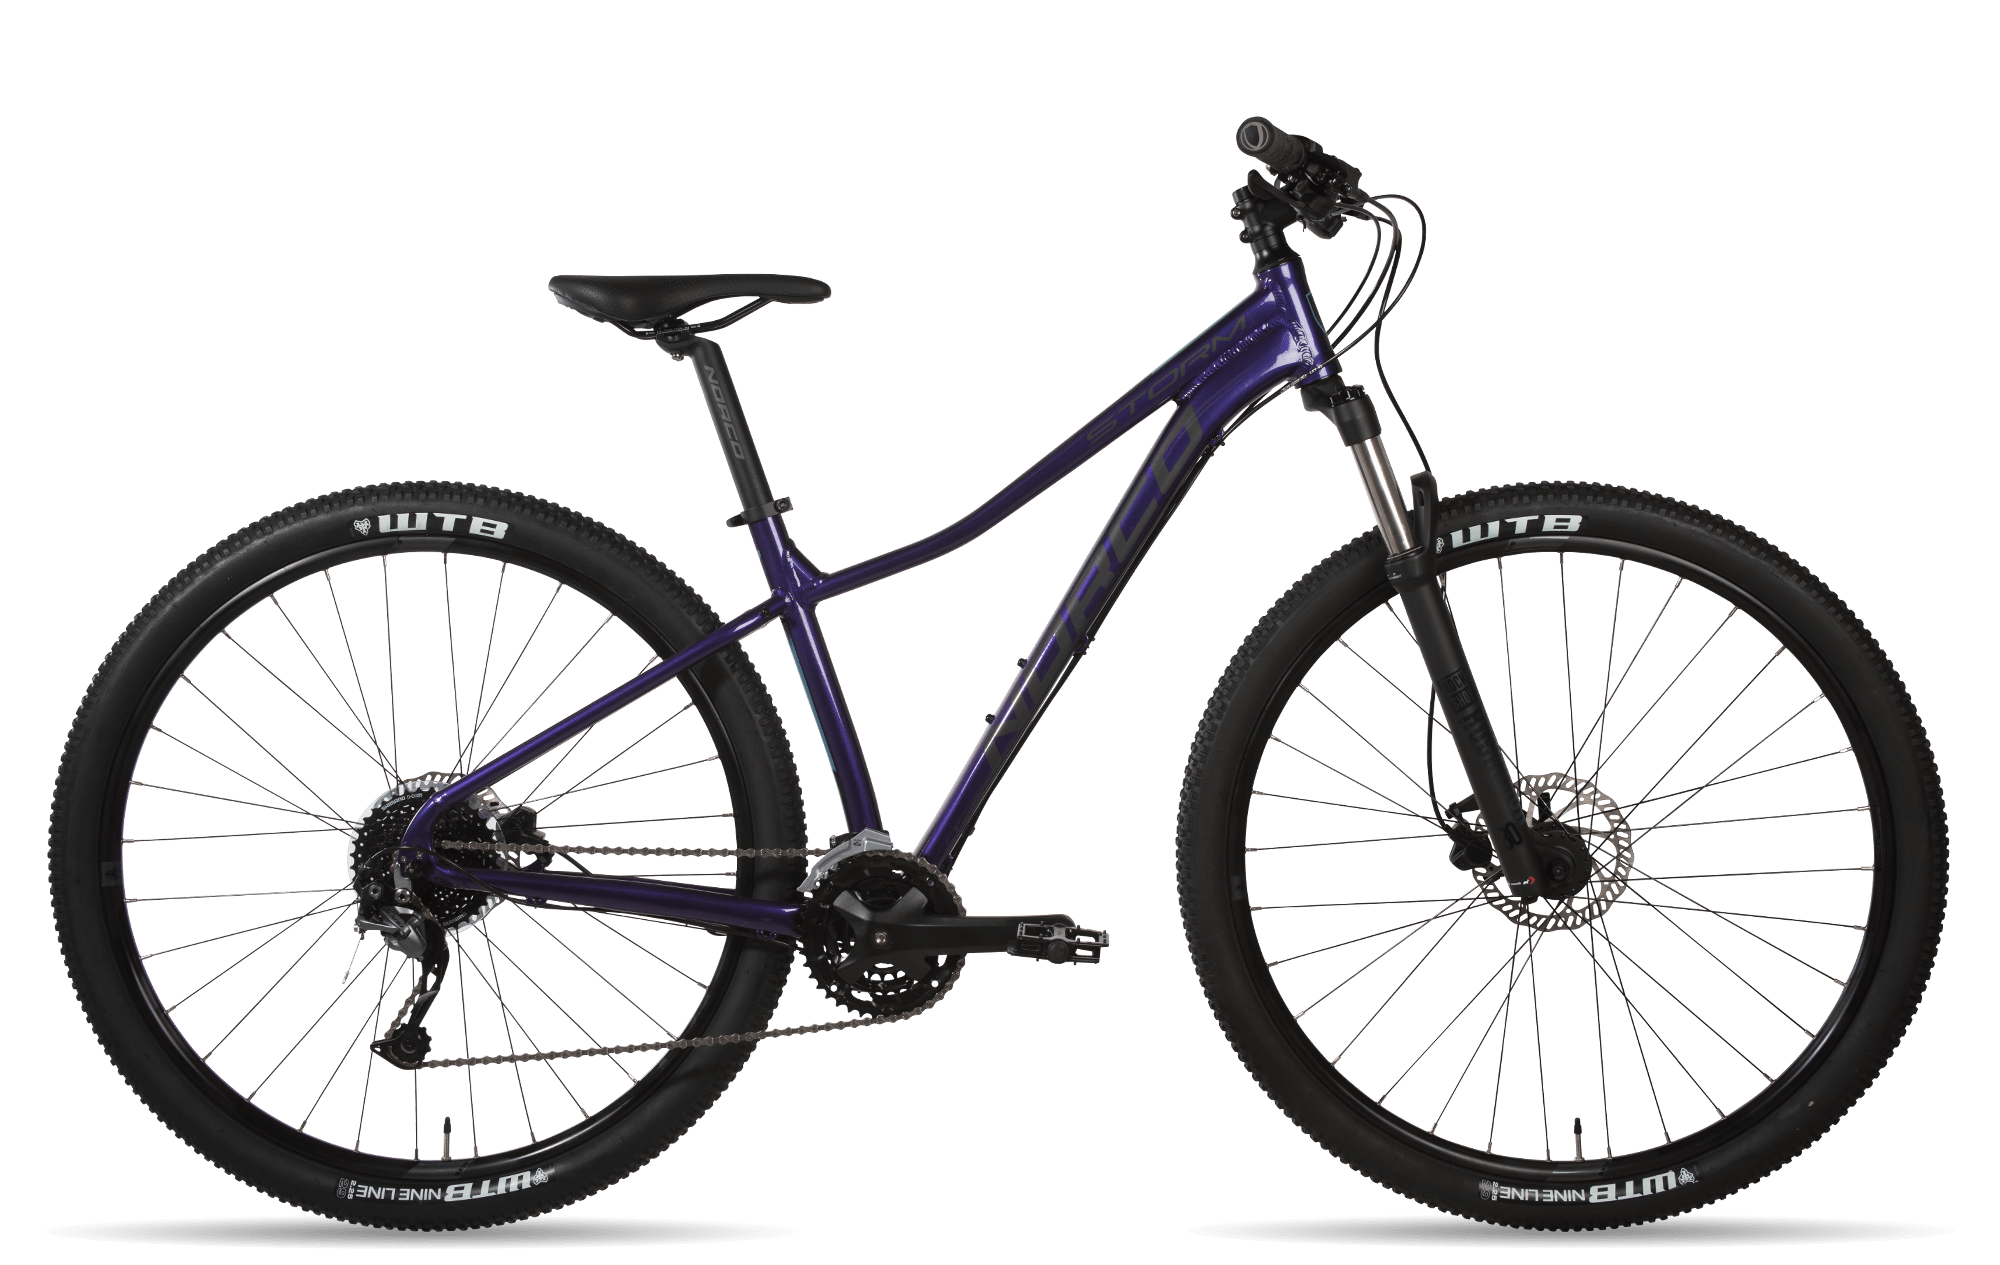 canadian electric bicycles